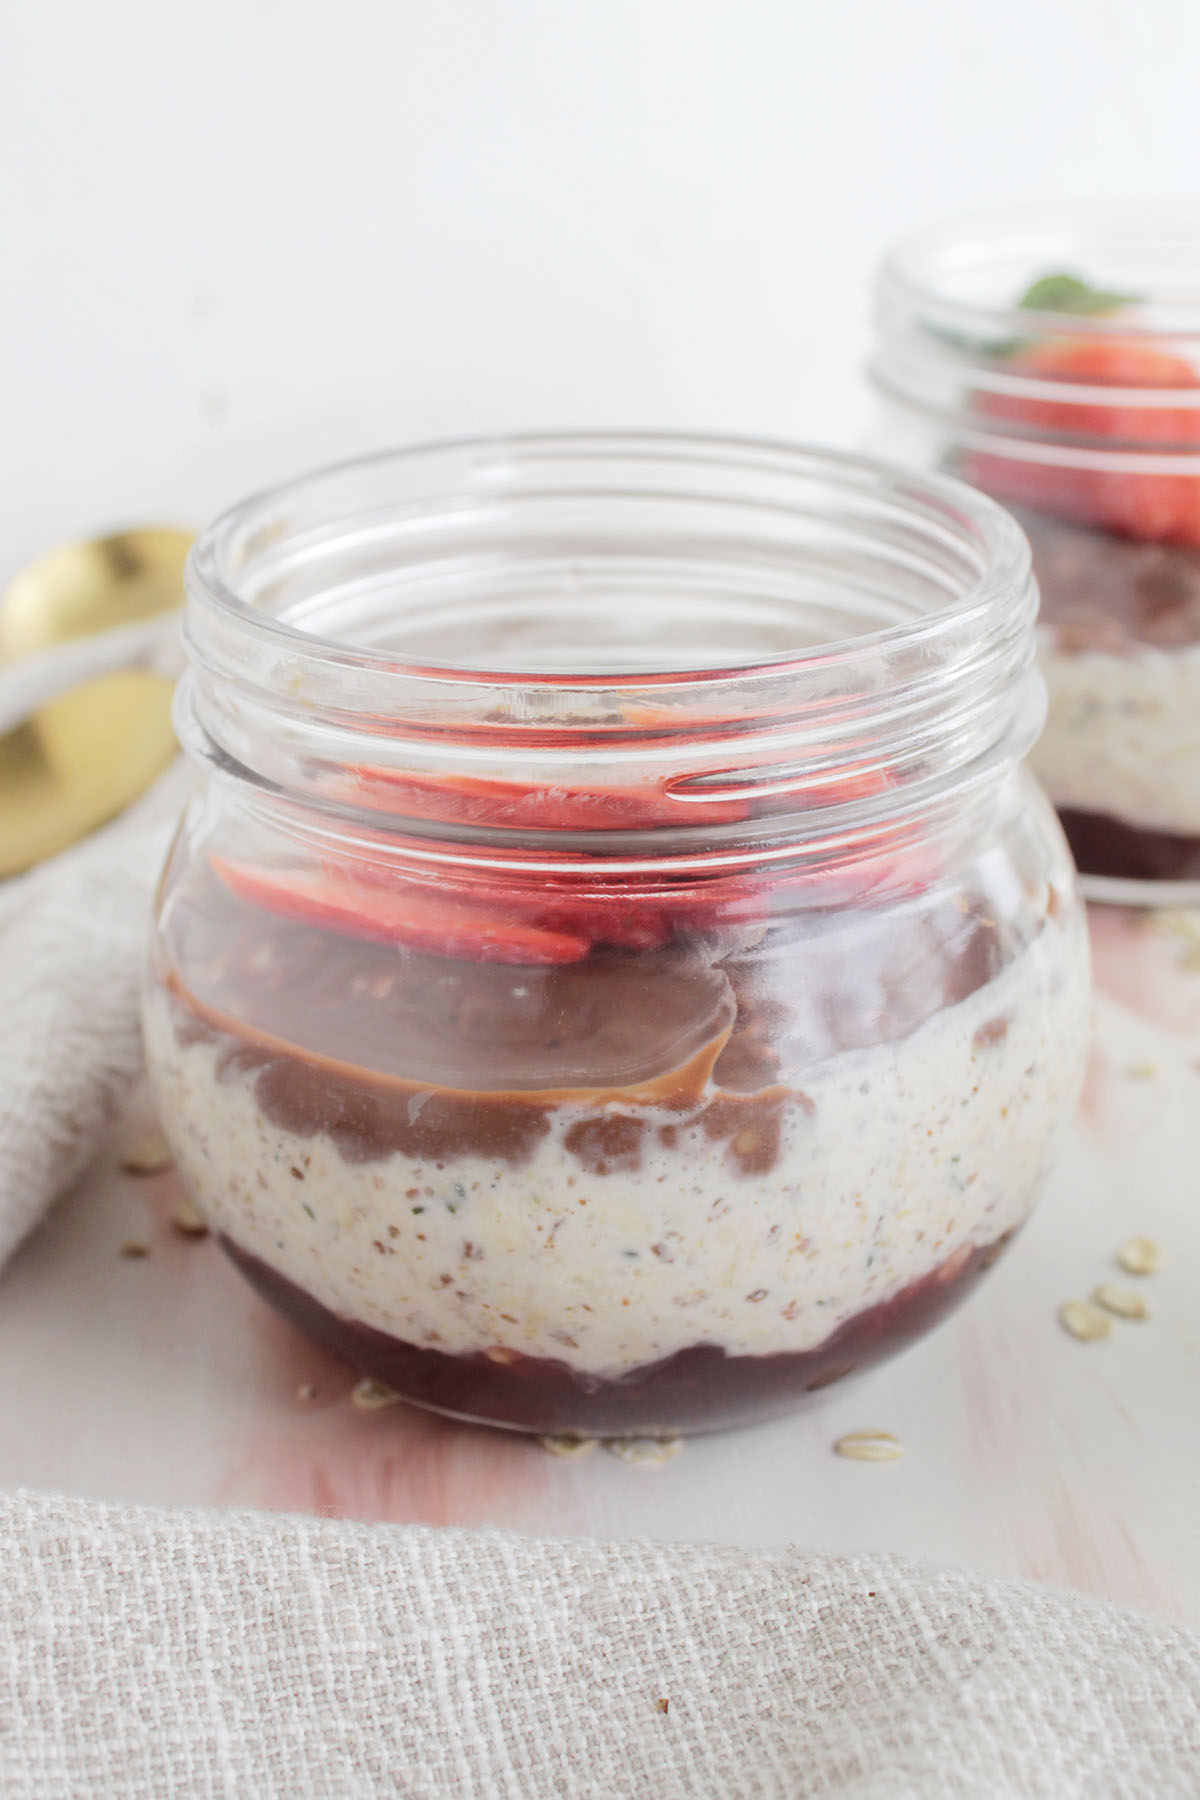 overnight oats layered with strawberry jam and chocolate topping.